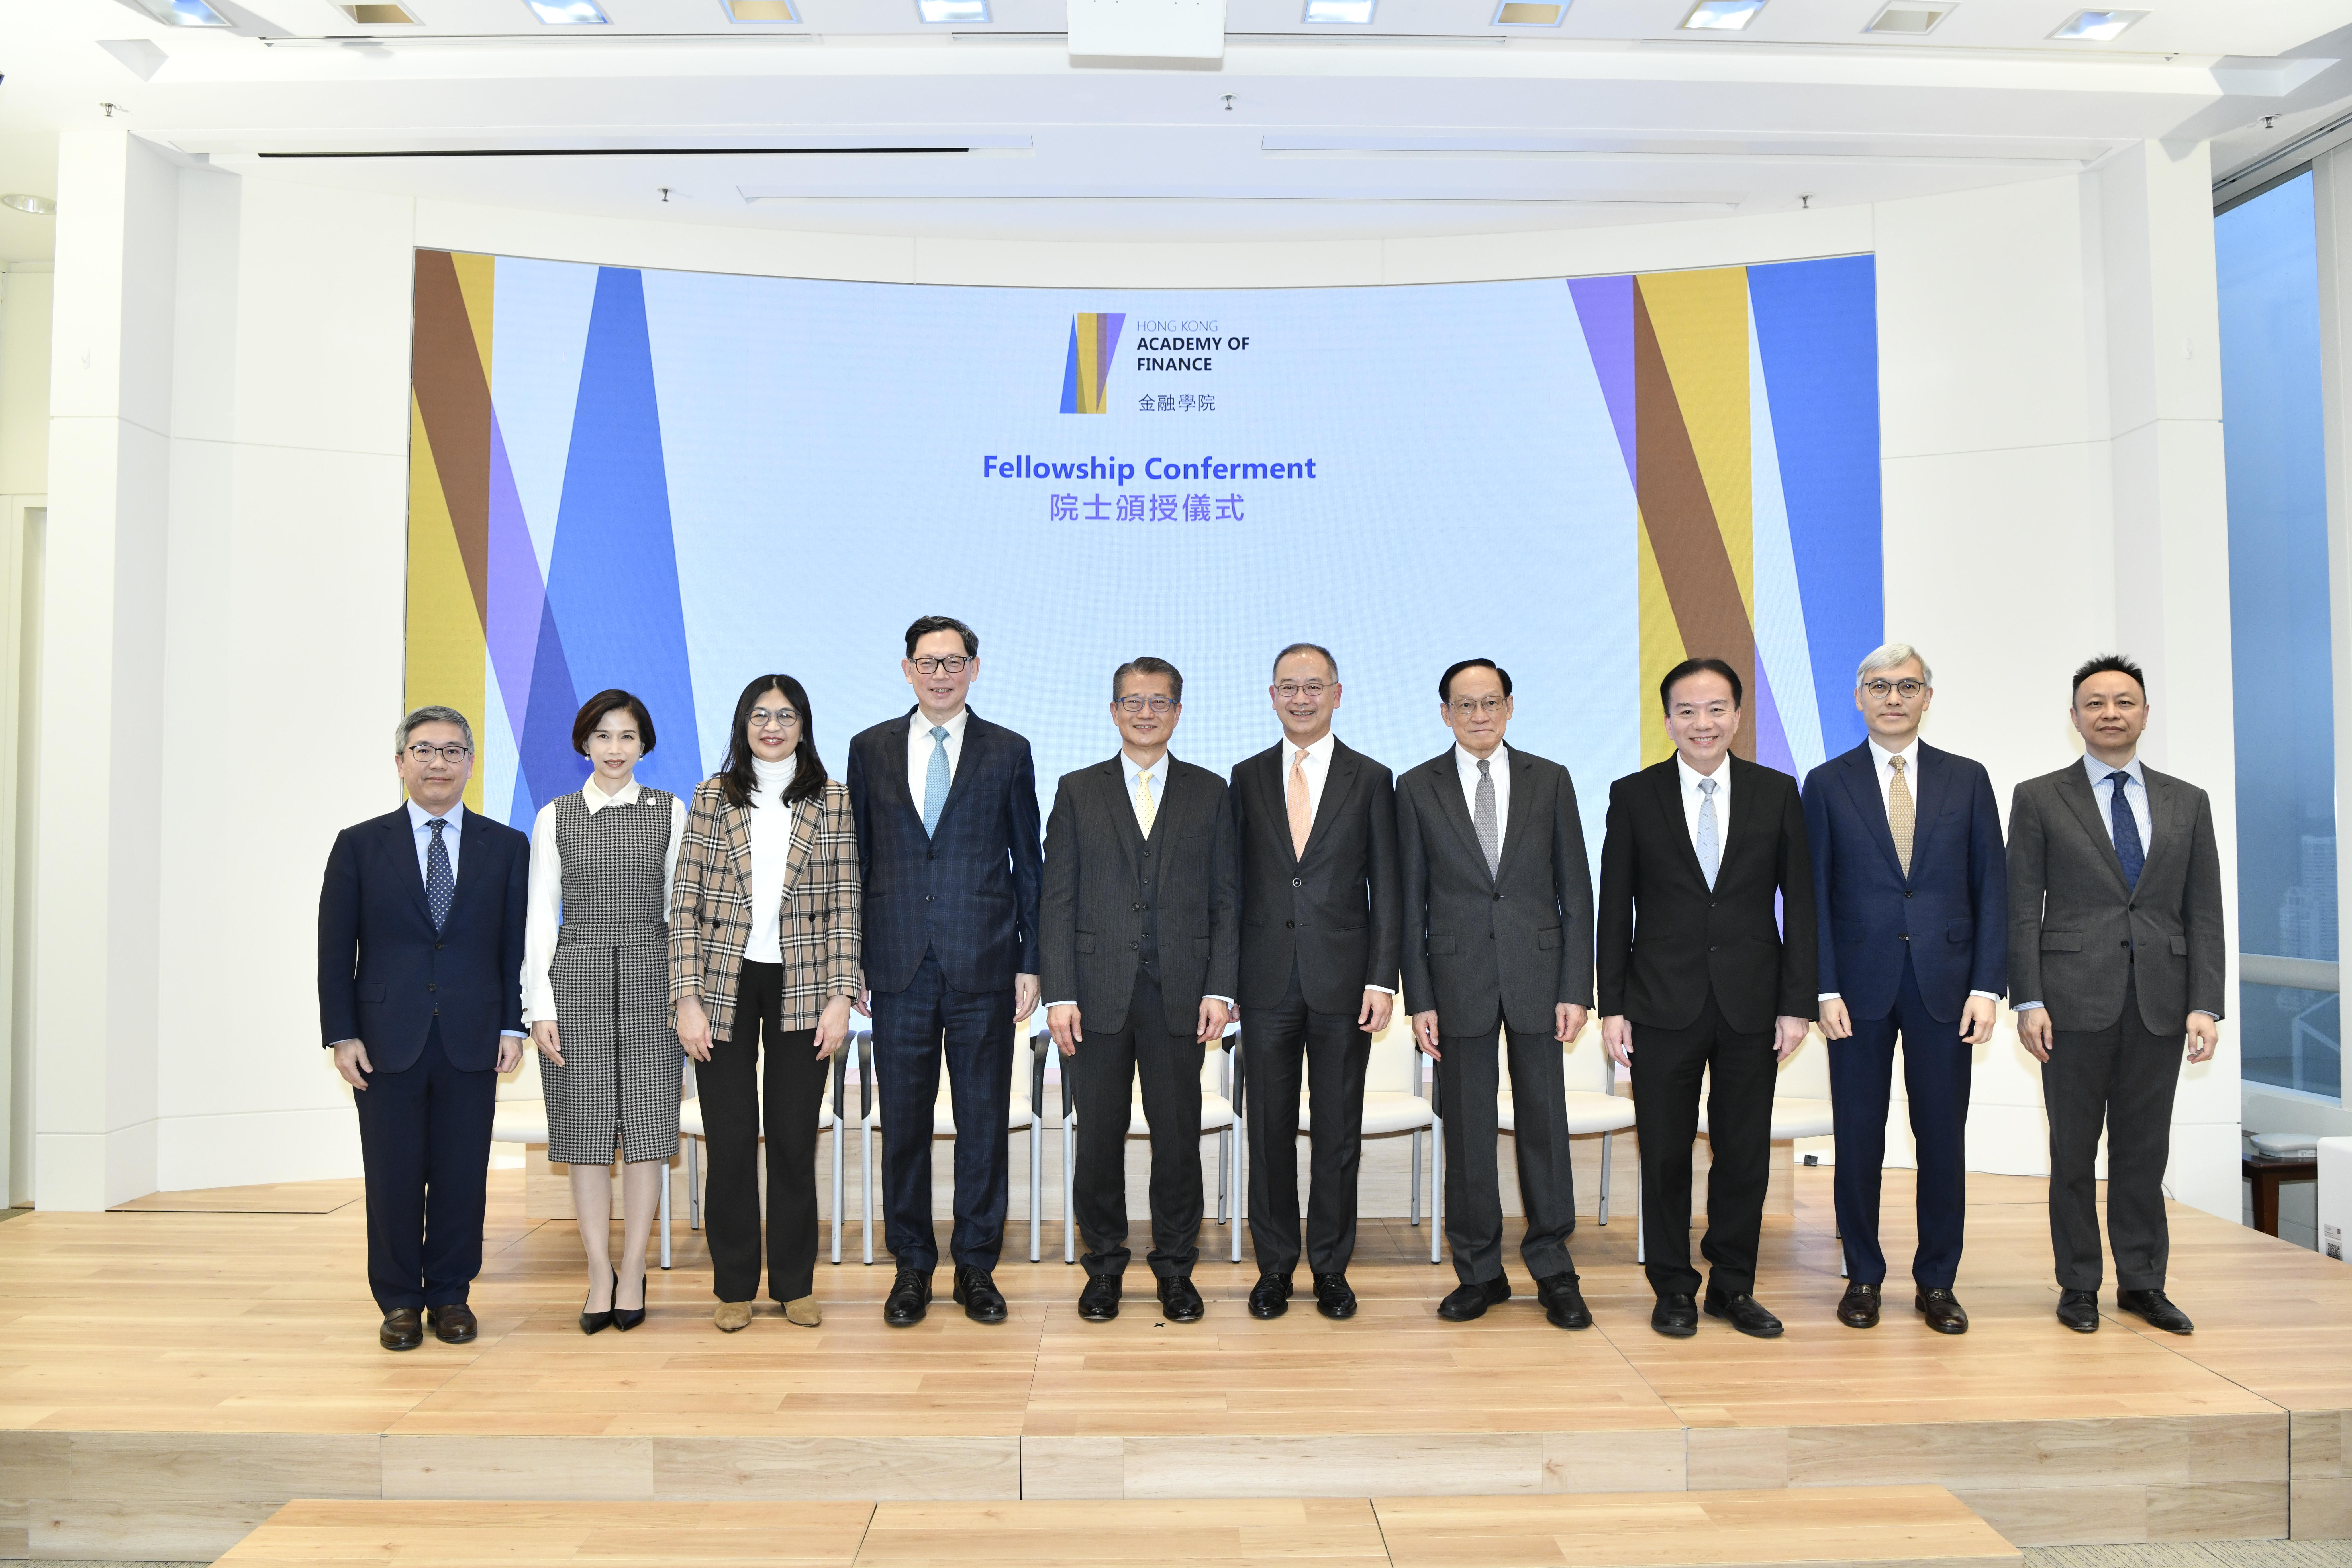 The Hong Kong Academy of Finance (AoF) confers Fellowship to three new Fellows today (14 December), including Dr Norman Chan (fourth from left), Professor Edward Chen (fourth from right) and Dr David Wong (third from right). Photo shows the three new Fellows together with the Financial Secretary of the Government of the Hong Kong Special Administrative Region and Honorary President of the AoF, Mr Paul Chan Mo-po, Chief Executive of the Hong Kong Monetary Authority and Chairman of the AoF, Mr Eddie Yue and members of the Board of Directors of the AoF.